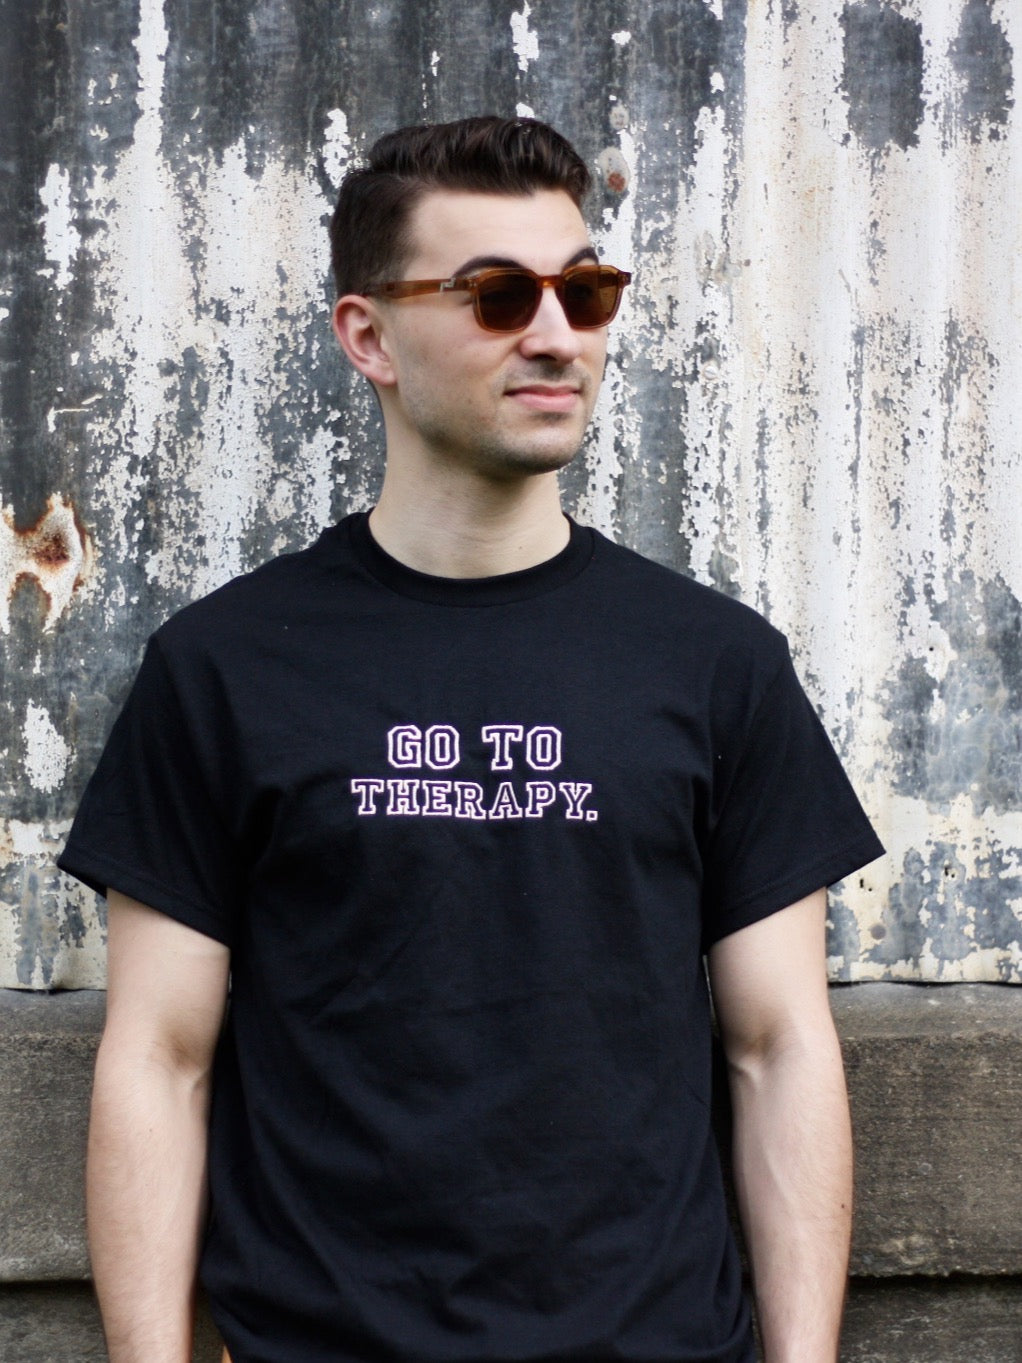 Go To Therapy. Unisex Shirt